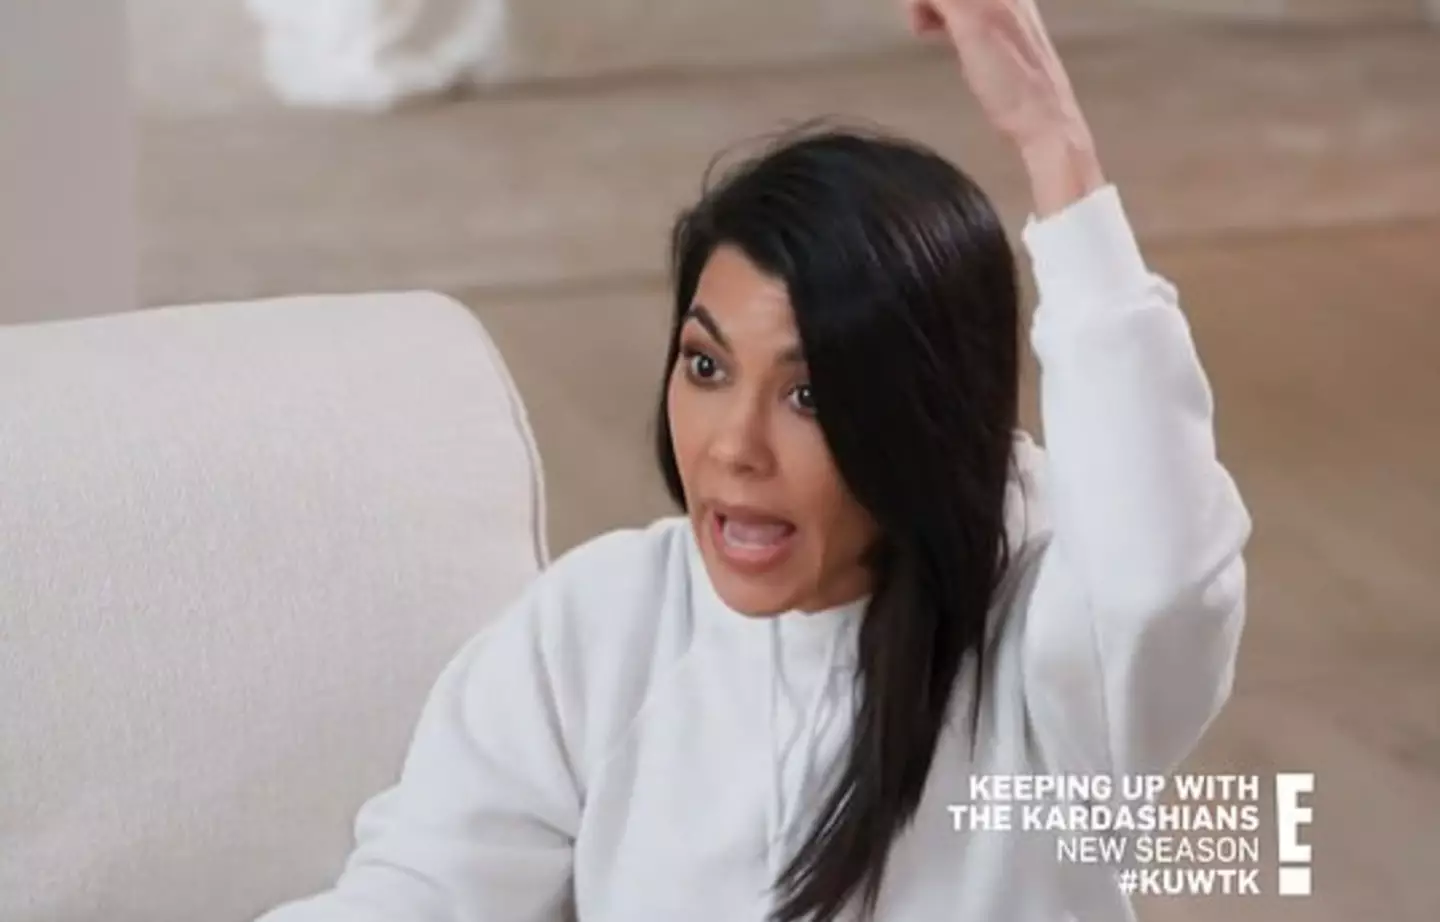 Kim pointed it out to Kourtney (